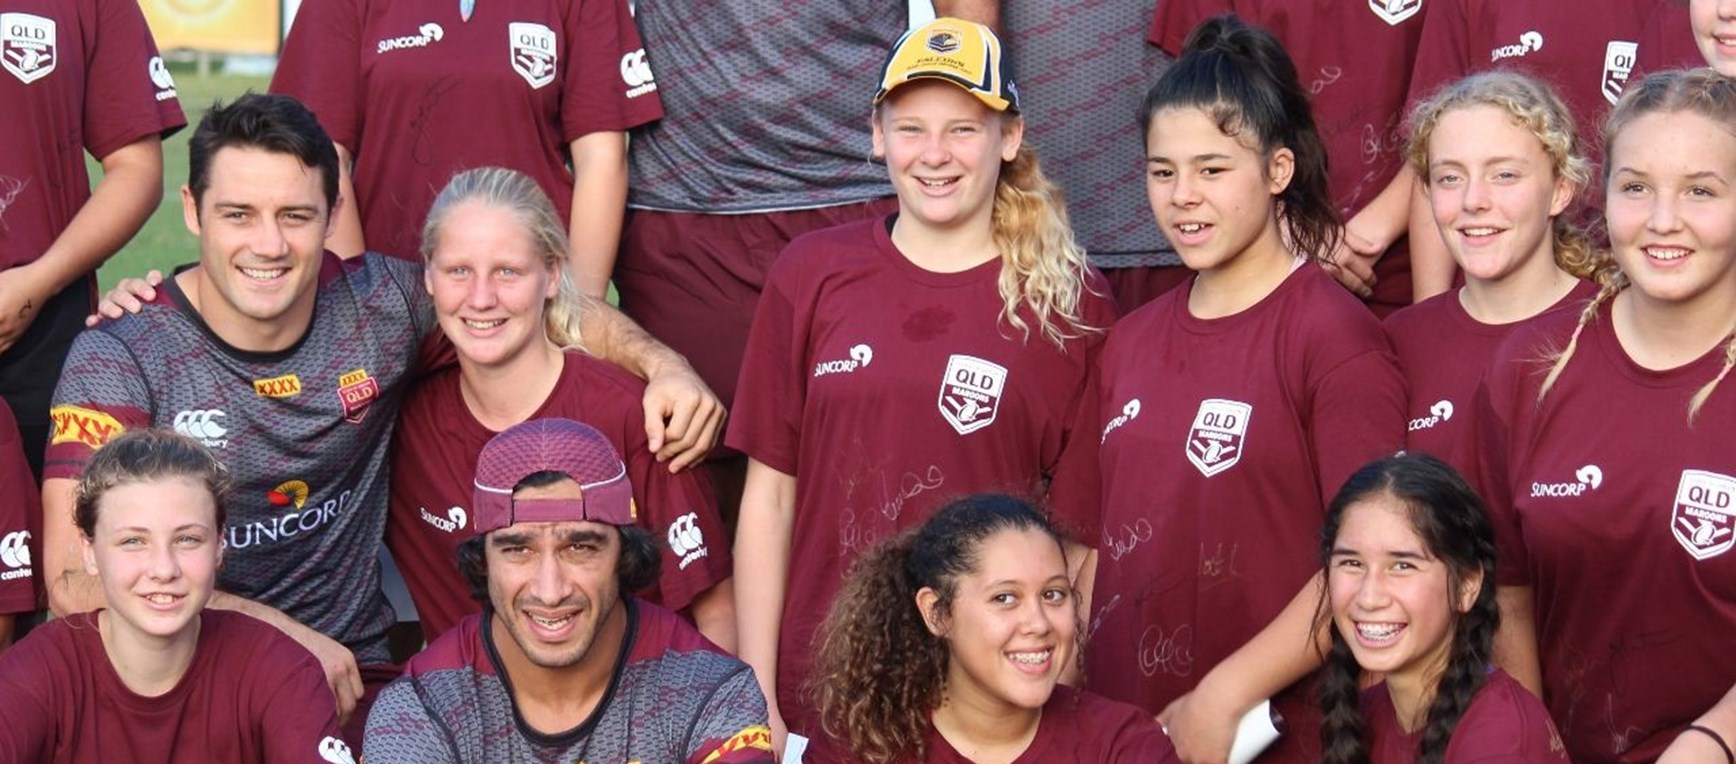 Gallery: Maroons Suncorp Clinic